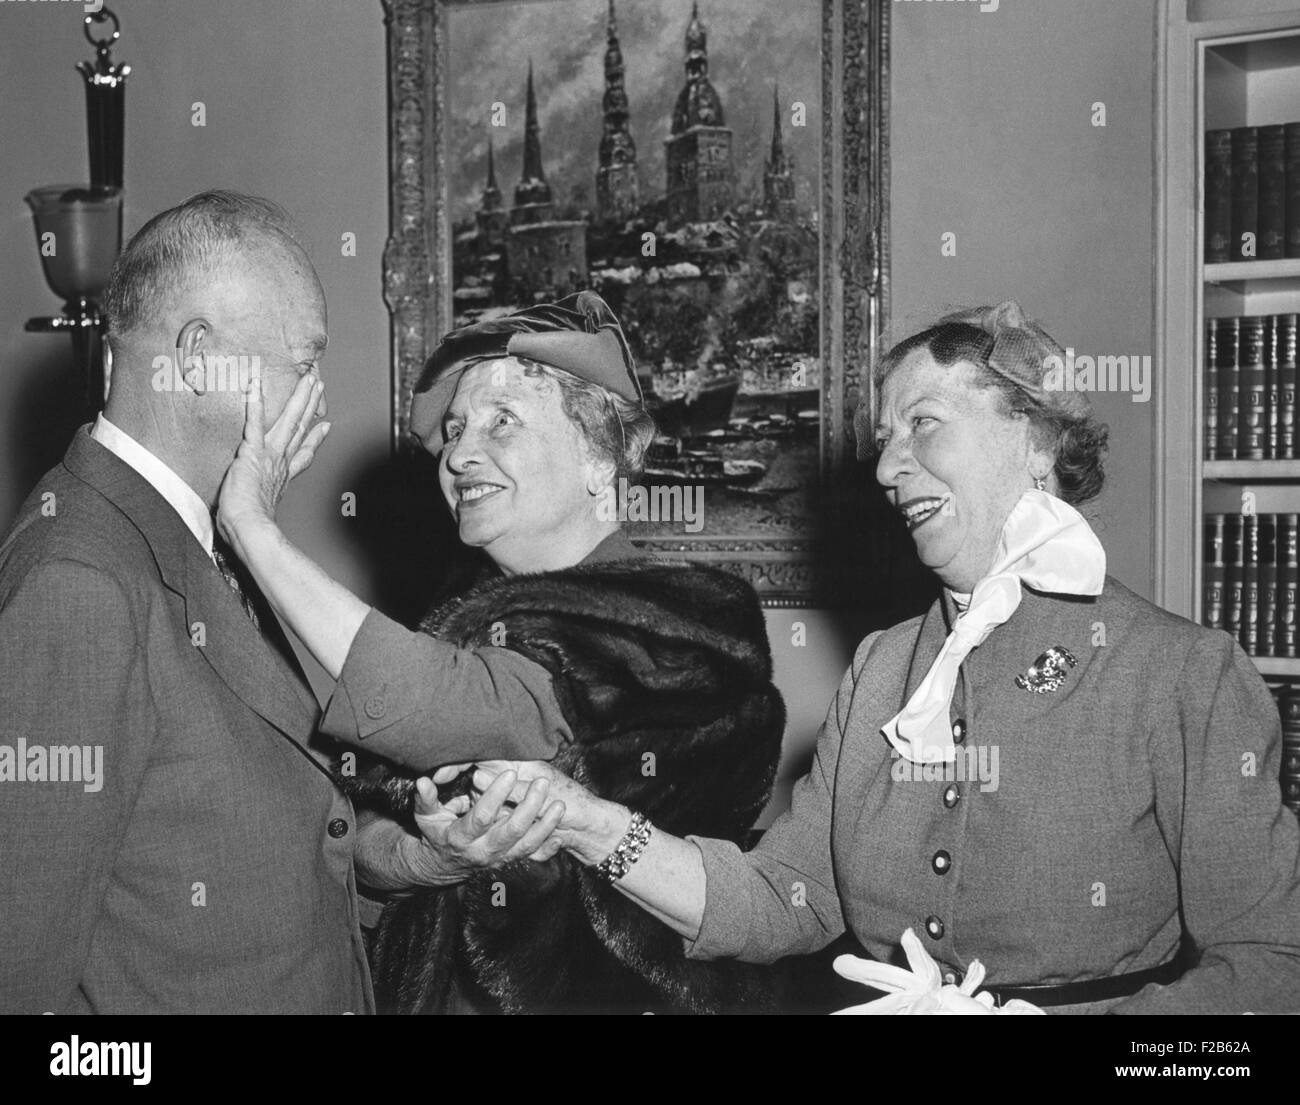 President Eisenhower with Helen Keller and her aide Polly Thompson. November 3, 1953. Patty Duke played Helen Keller in THE MIRACLE WORKER, a 1962 film about Keller's the early education. - (BSLOC 2014 16 168) Stock Photo